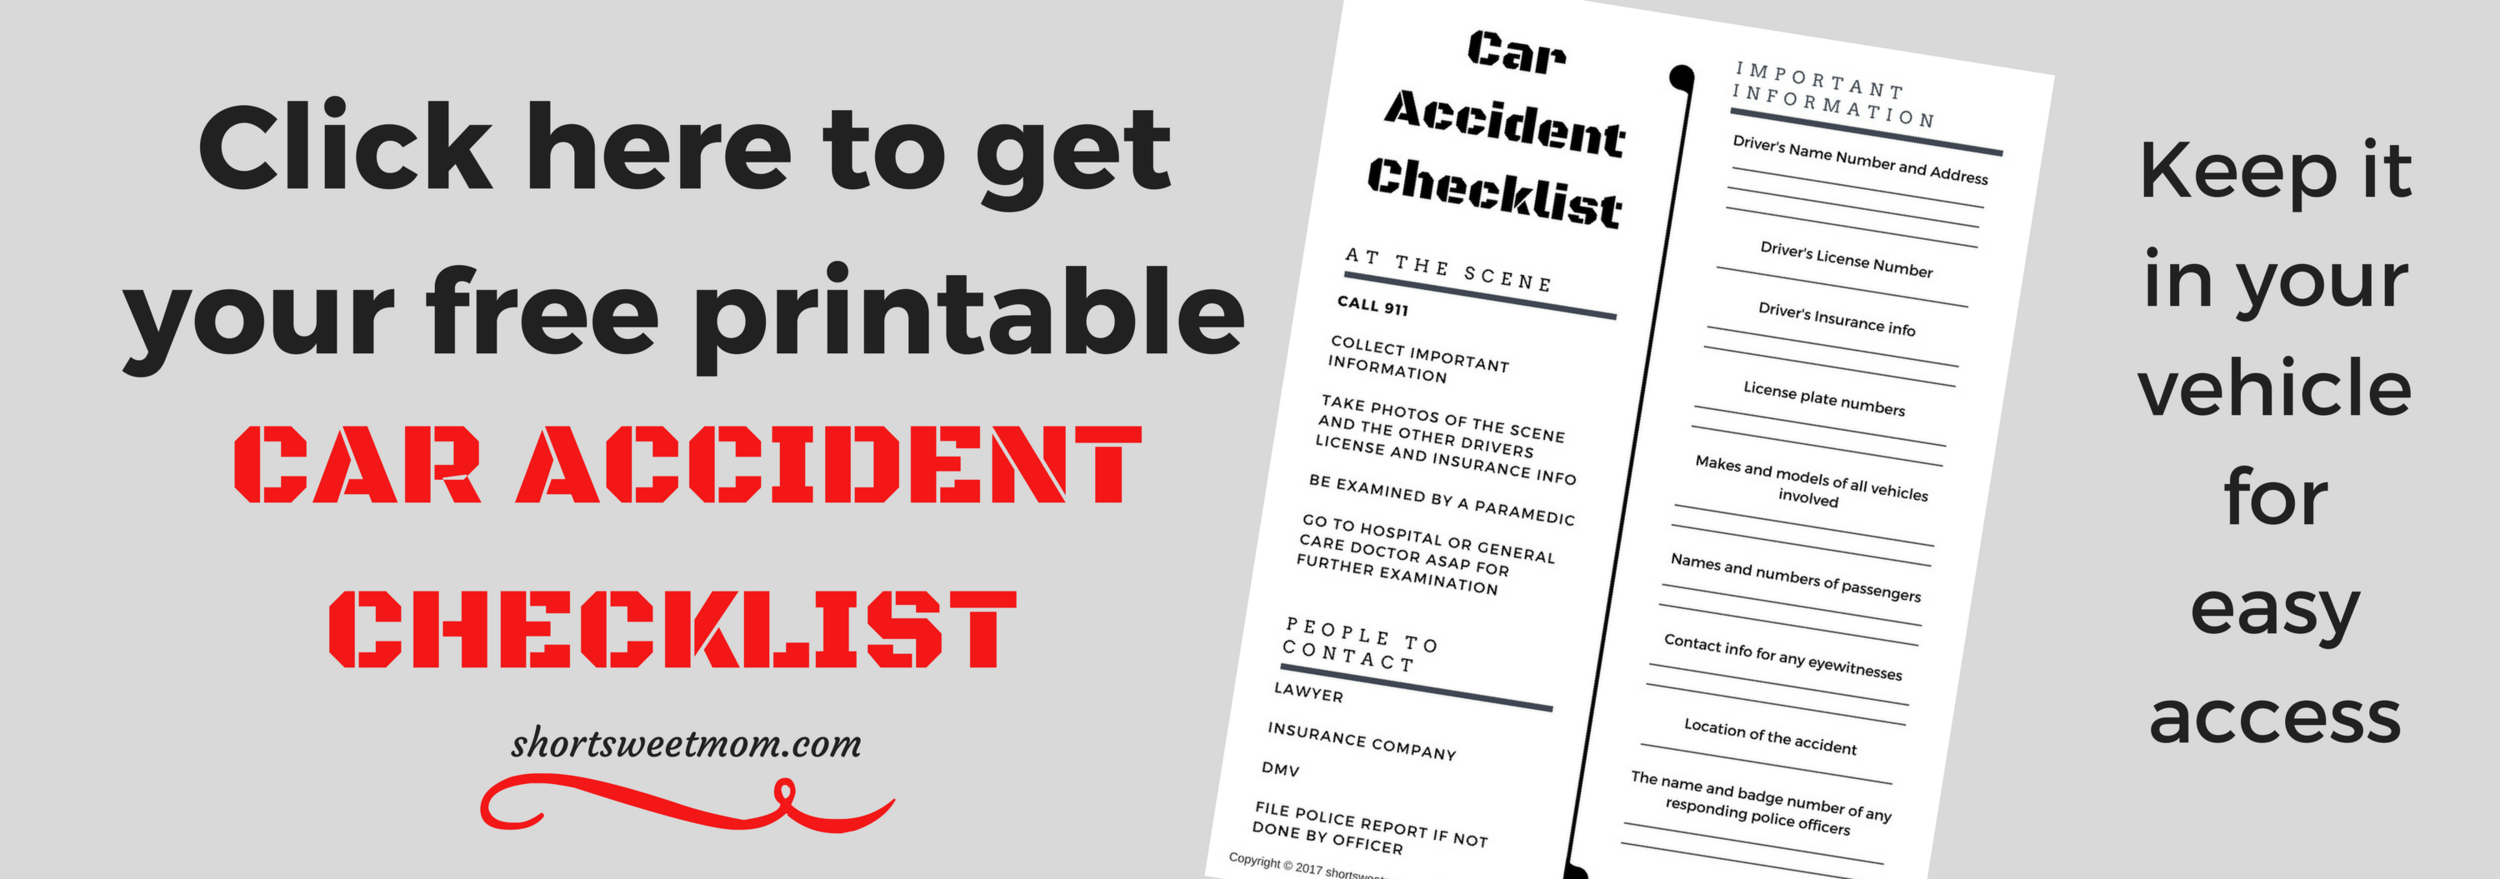 What to do if you are in a Car Accident with a Child in the Car. Get your free printable checklist to keep in your vehicle. Visit shortsweetmom.com to find out what to do if you get in a car accident. 